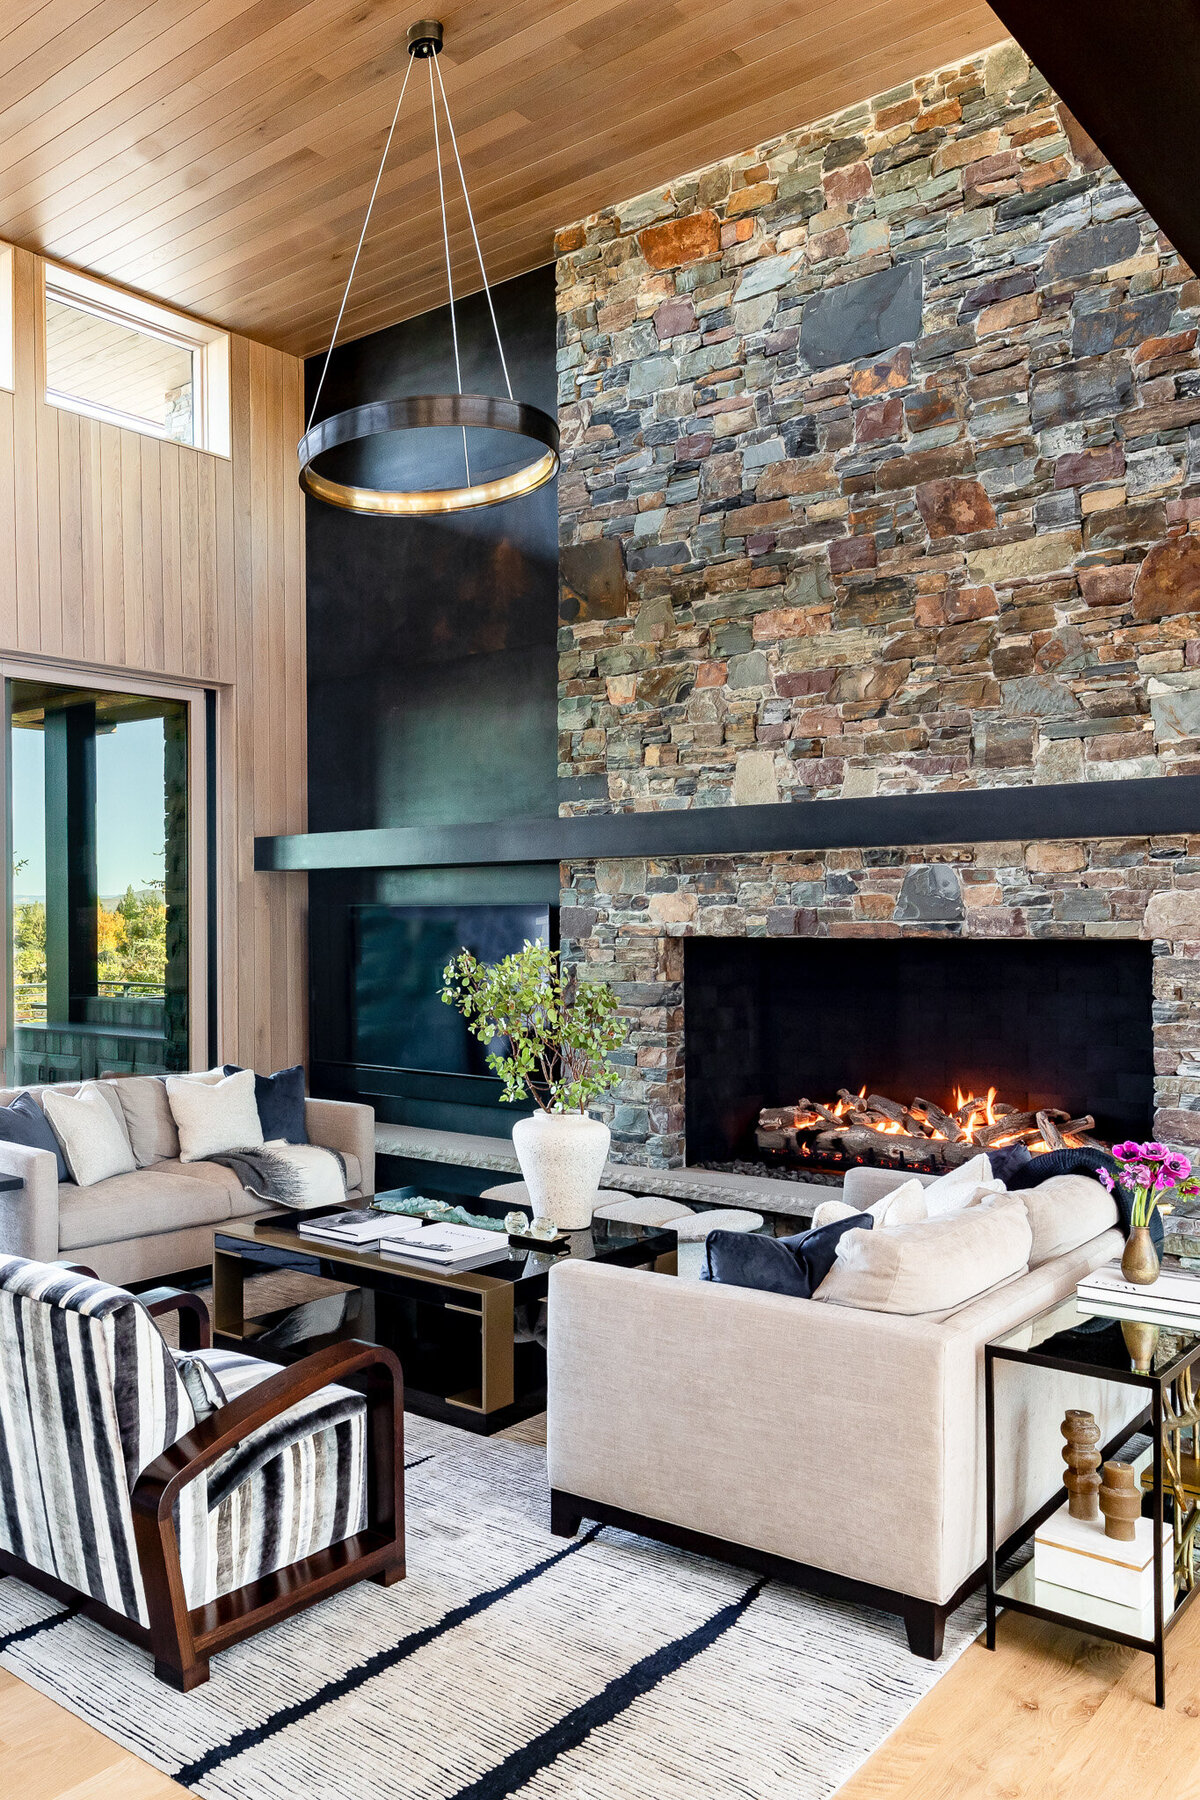 Carrie-Delany-Interiors-Promontory-Contemporary-Park-City-Utah-11